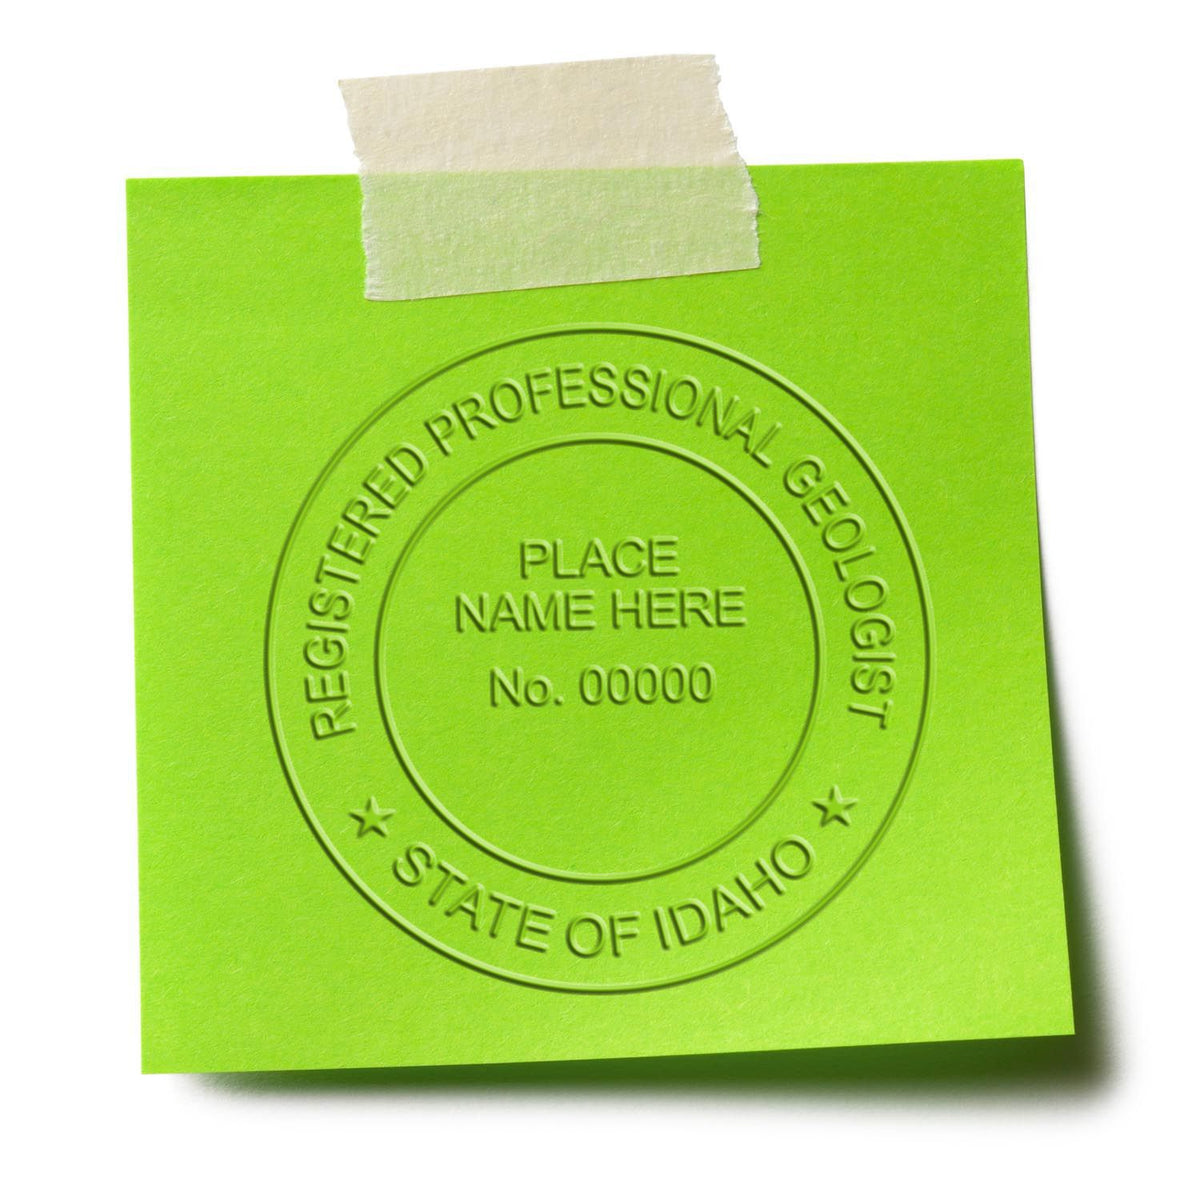 An in use photo of the Long Reach Idaho Geology Seal showing a sample imprint on a cardstock